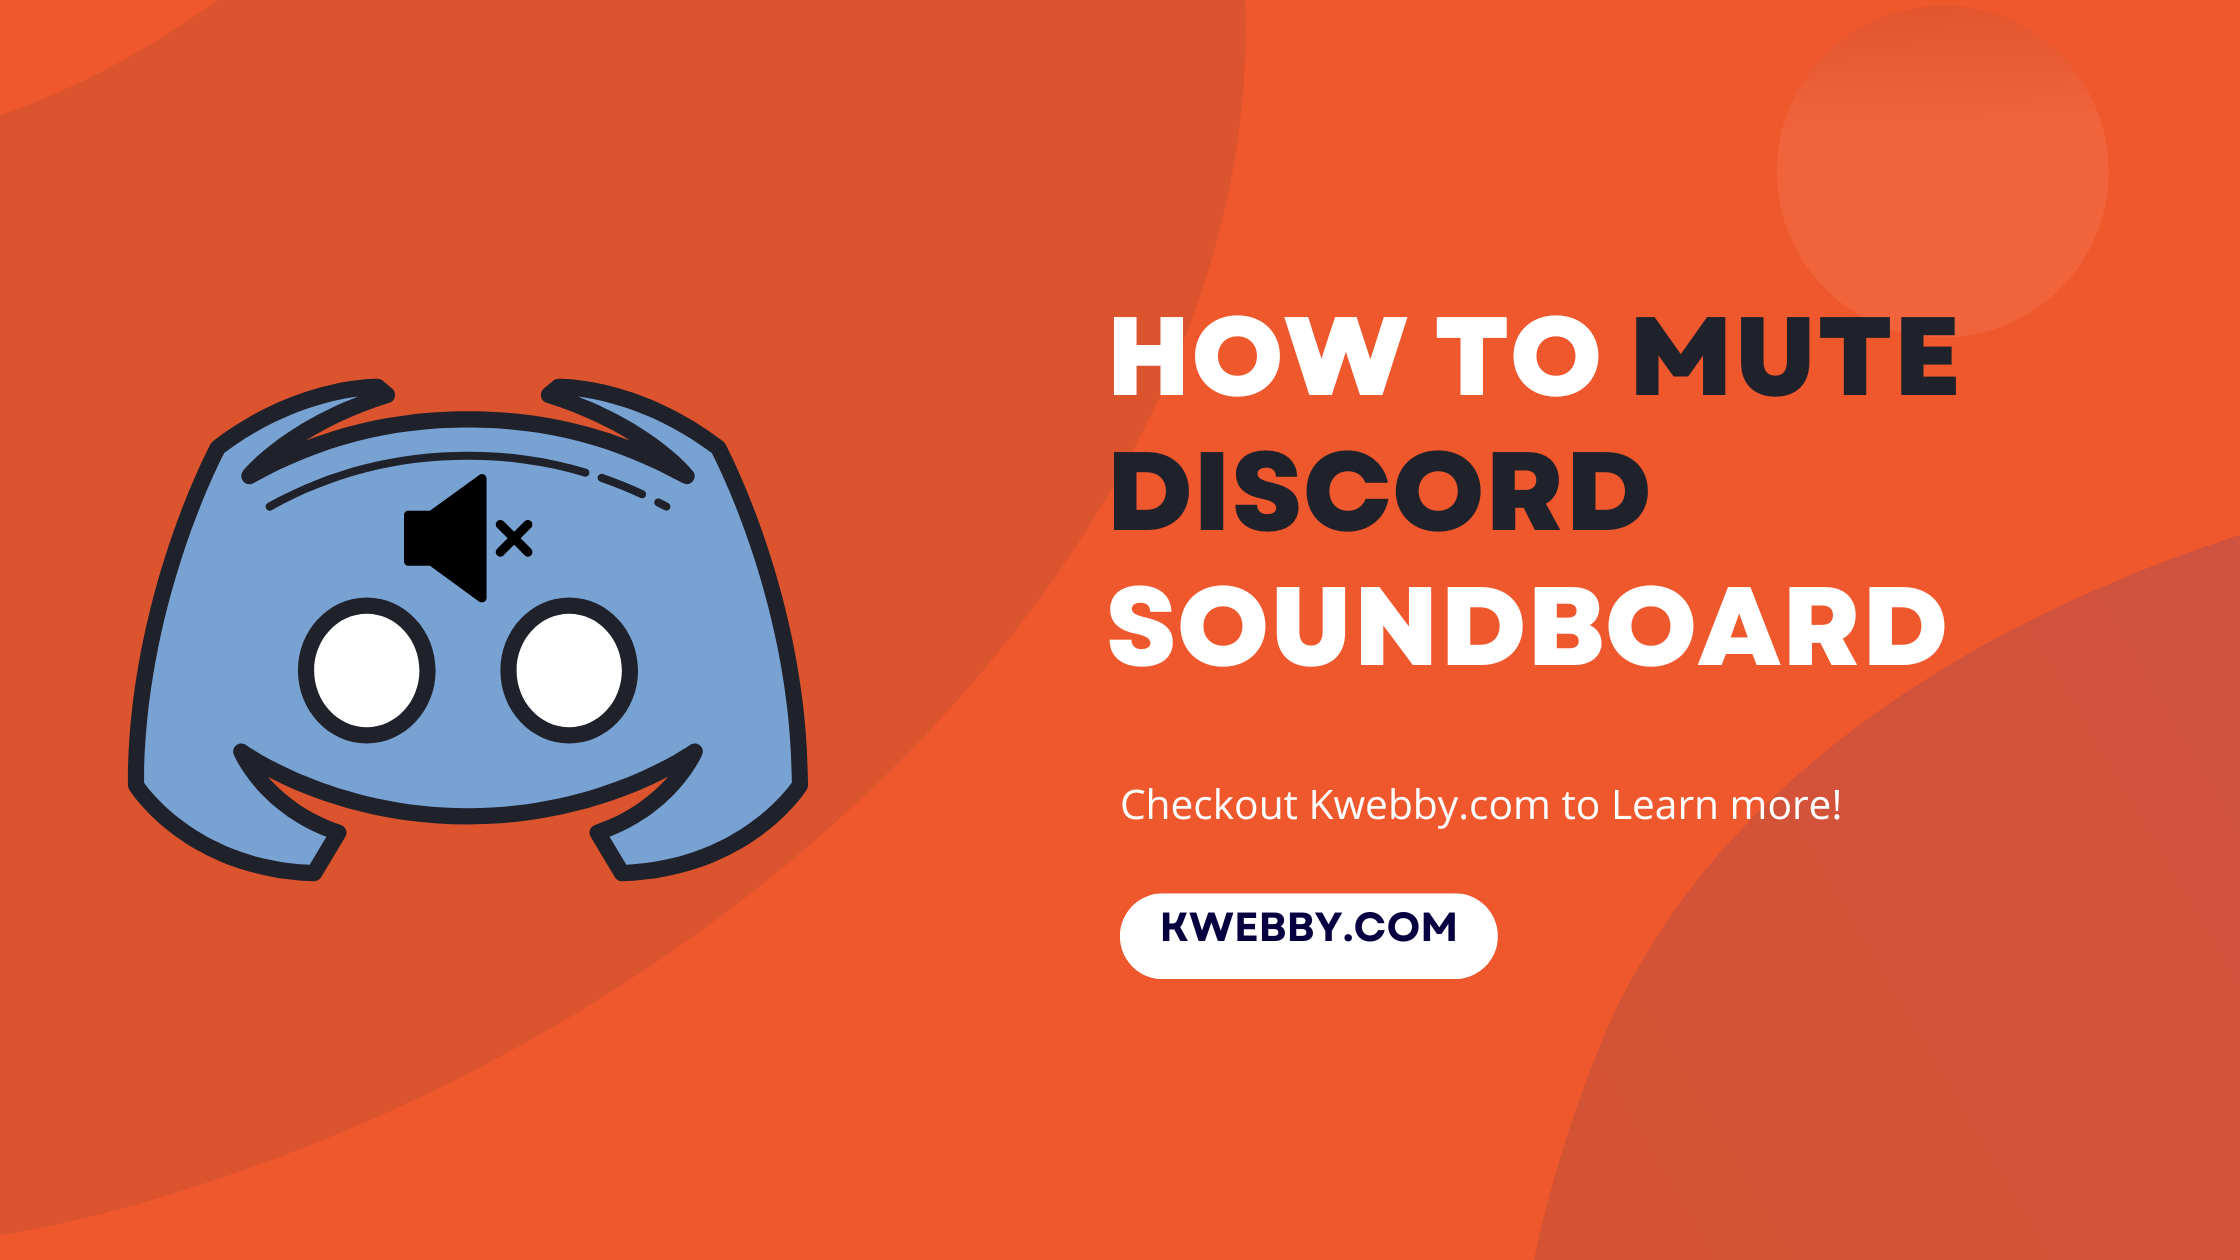 How to mute discord soundboard